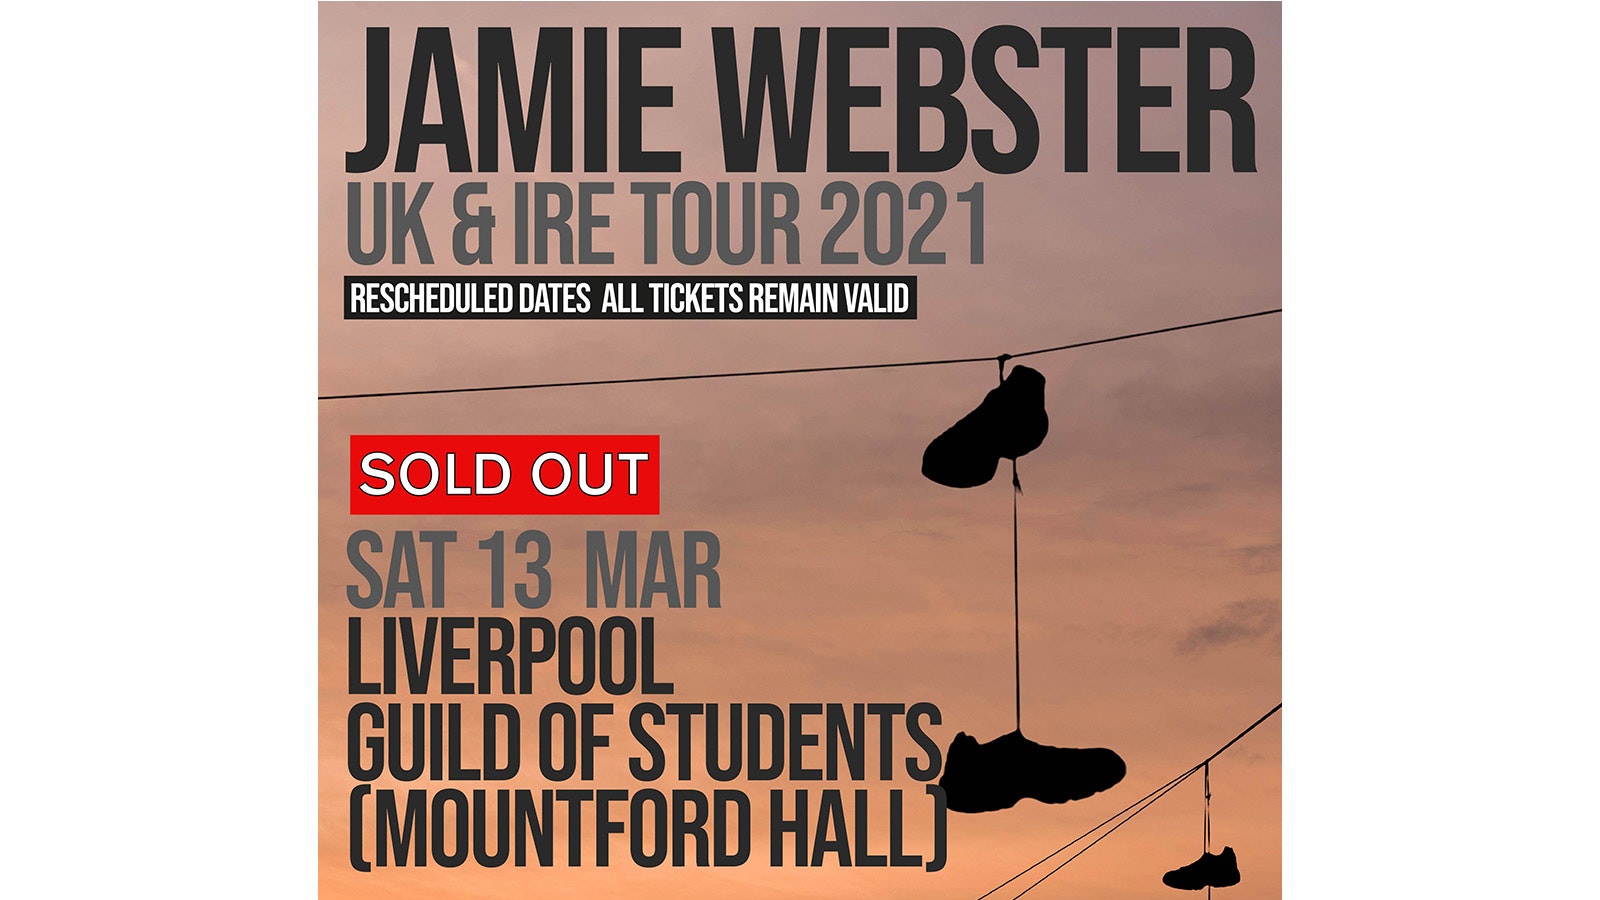 Jamie Webster at Liverpool Guild Sold Out